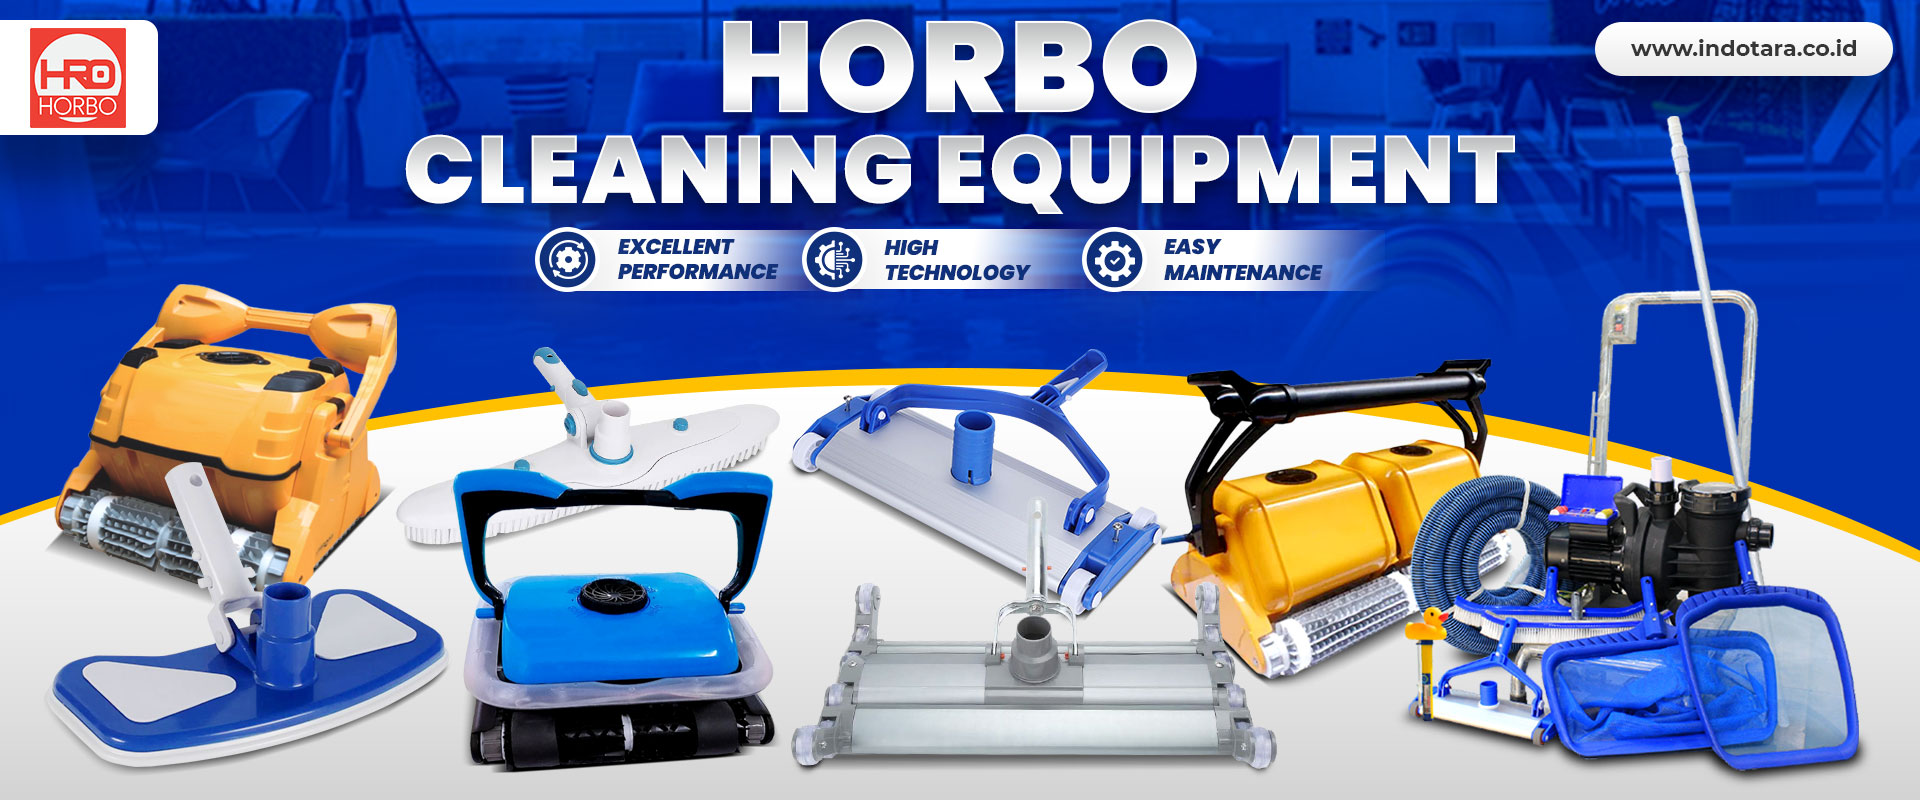 Horbo Cleaning Equipment